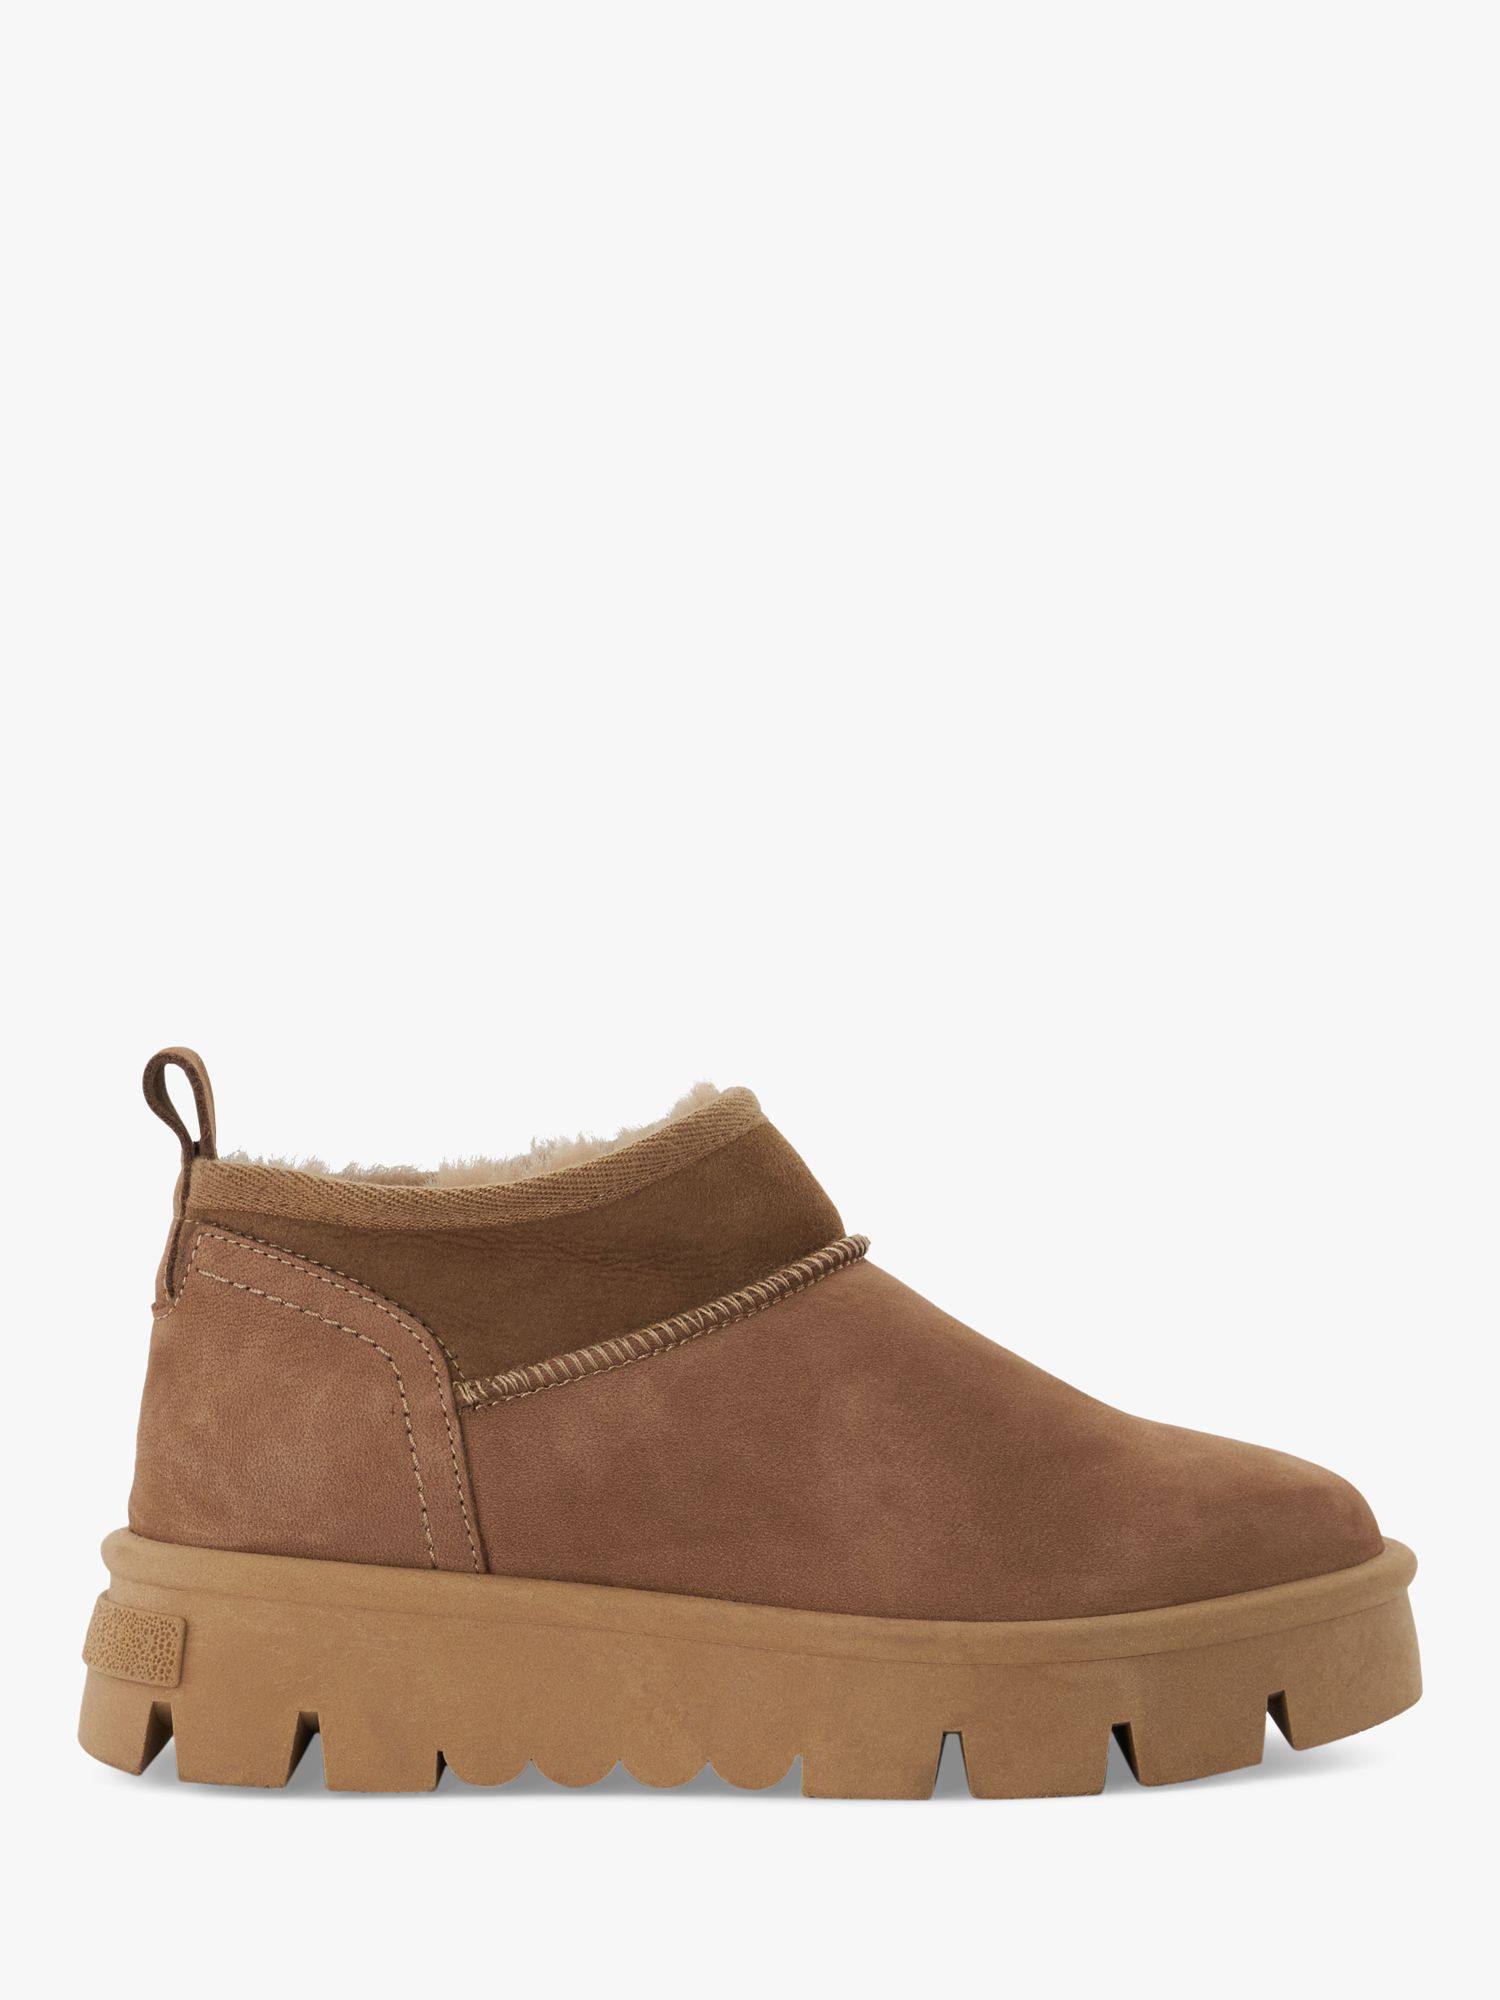 Buy Dune Pod Suede Ankle Boots, Taupe Online at johnlewis.com